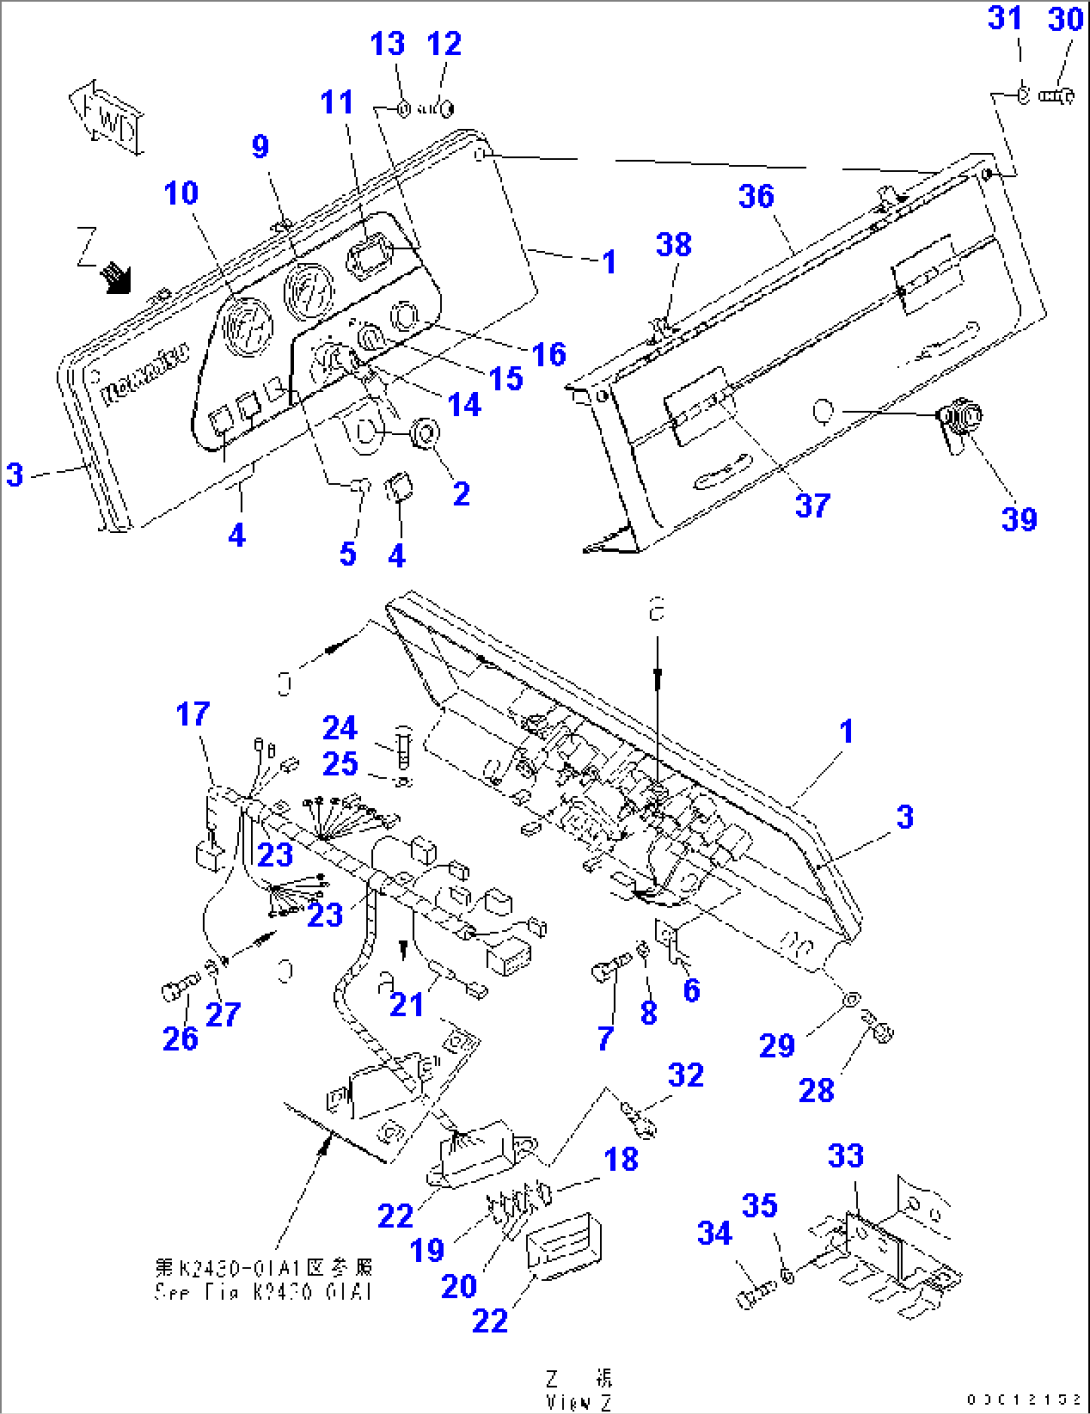 PANEL (FOR MONO LEVER STEERING) (WITH VANDALISM PROTECTION)